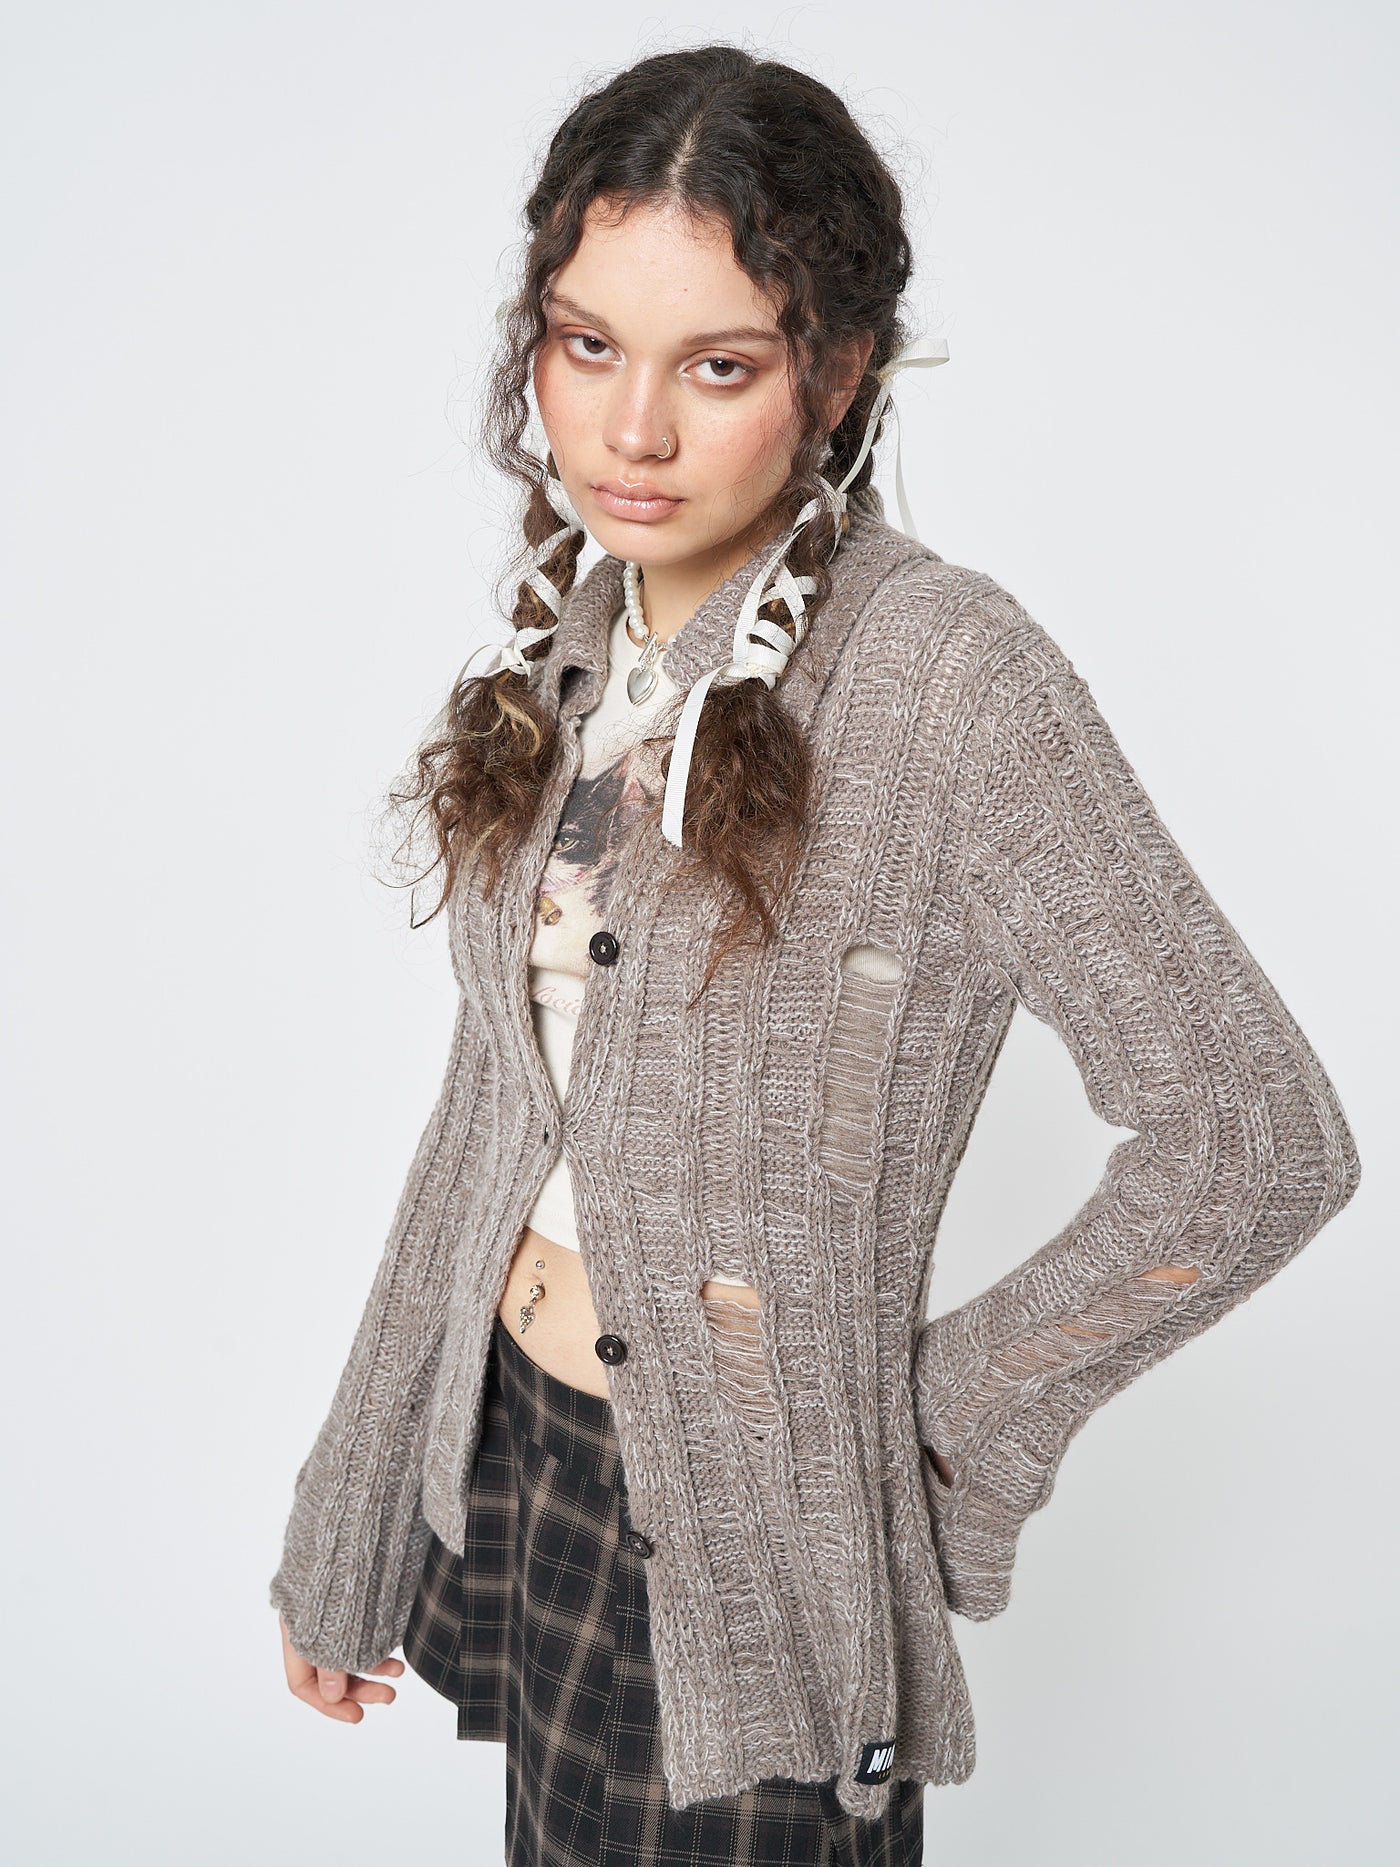 A laid-back and effortlessly stylish sand-colored knit cardigan with a distressed texture for a relaxed vibe.